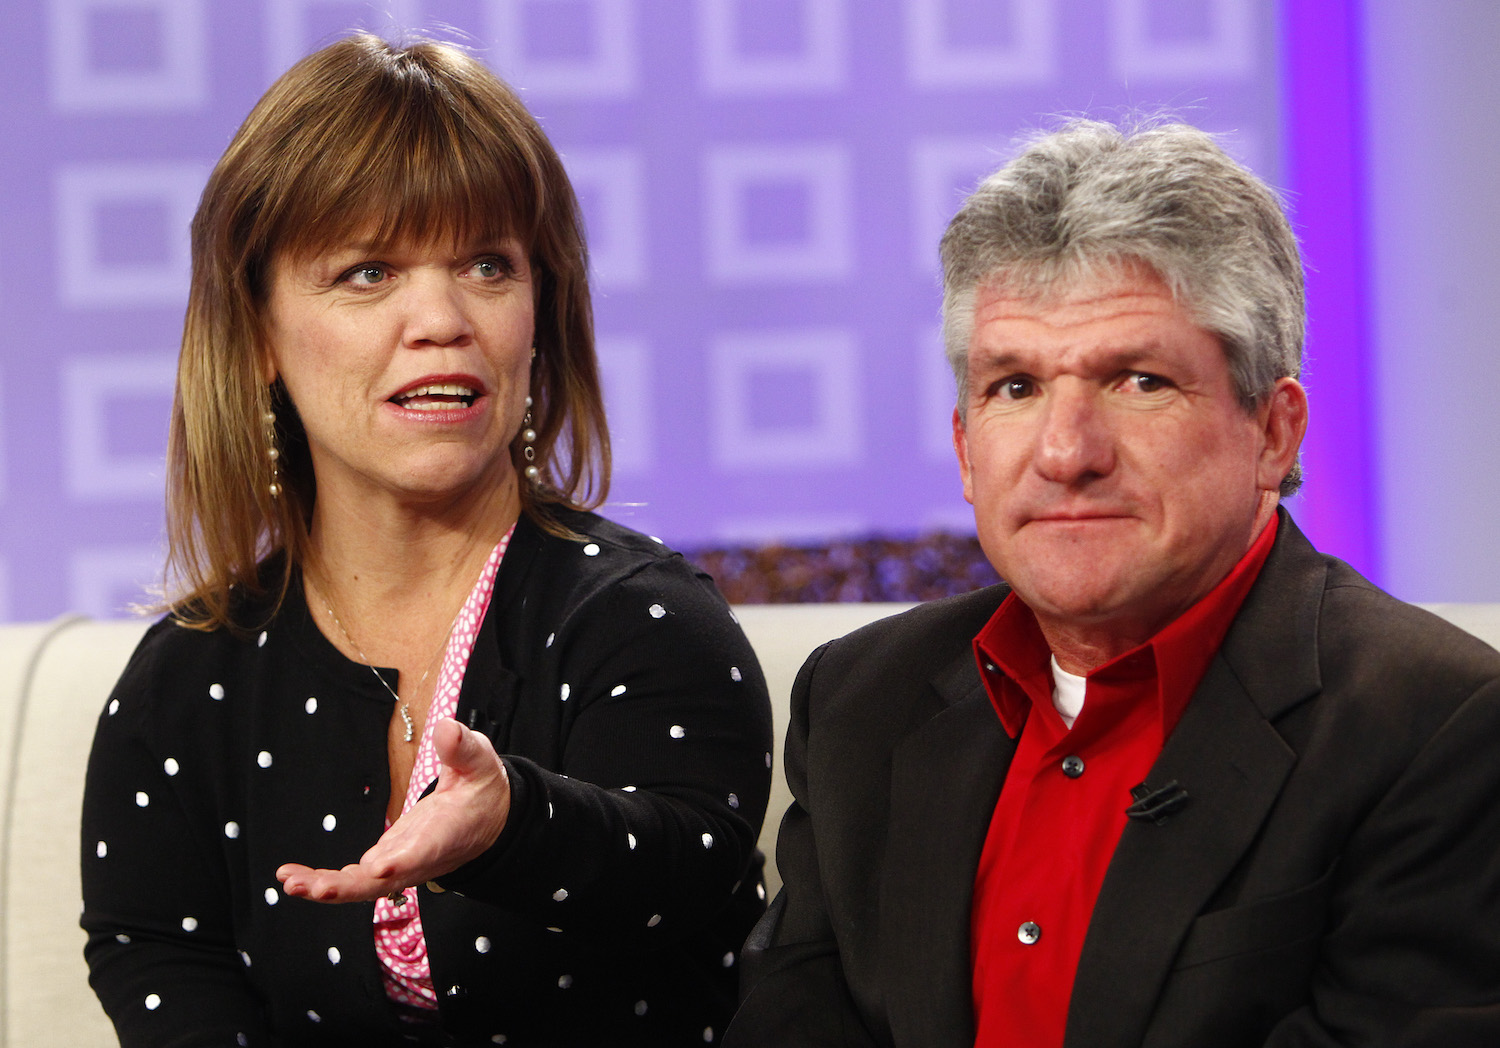 Amy Roloff and Matt Roloff from 'Little People, Big World' sitting and talking on a couch against a purple background